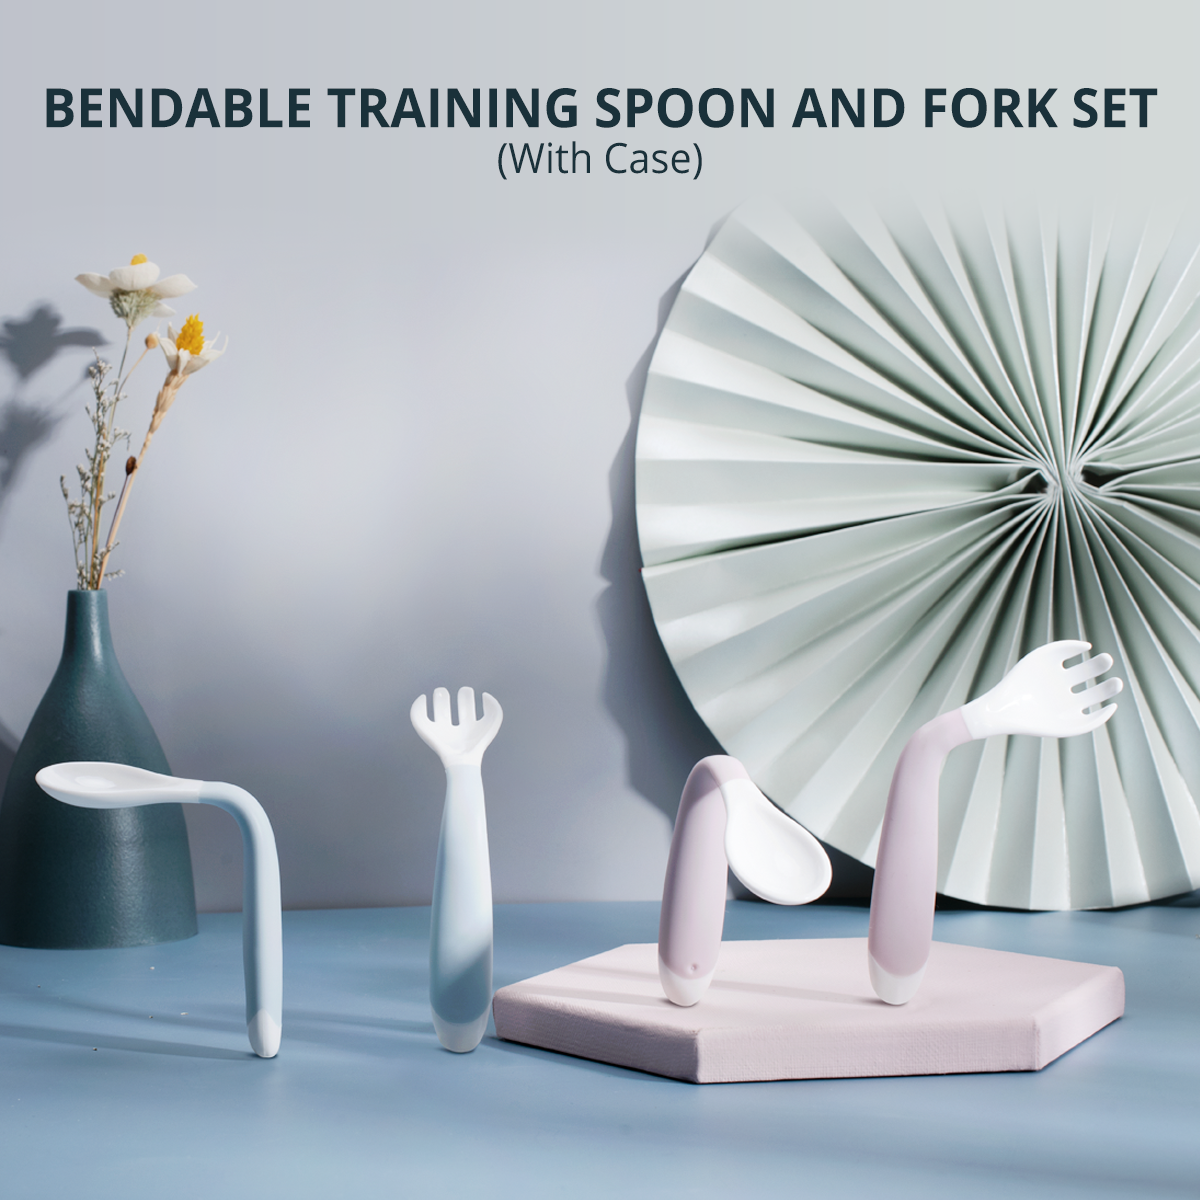 Bendable Training Spoon and Fork Set with Case